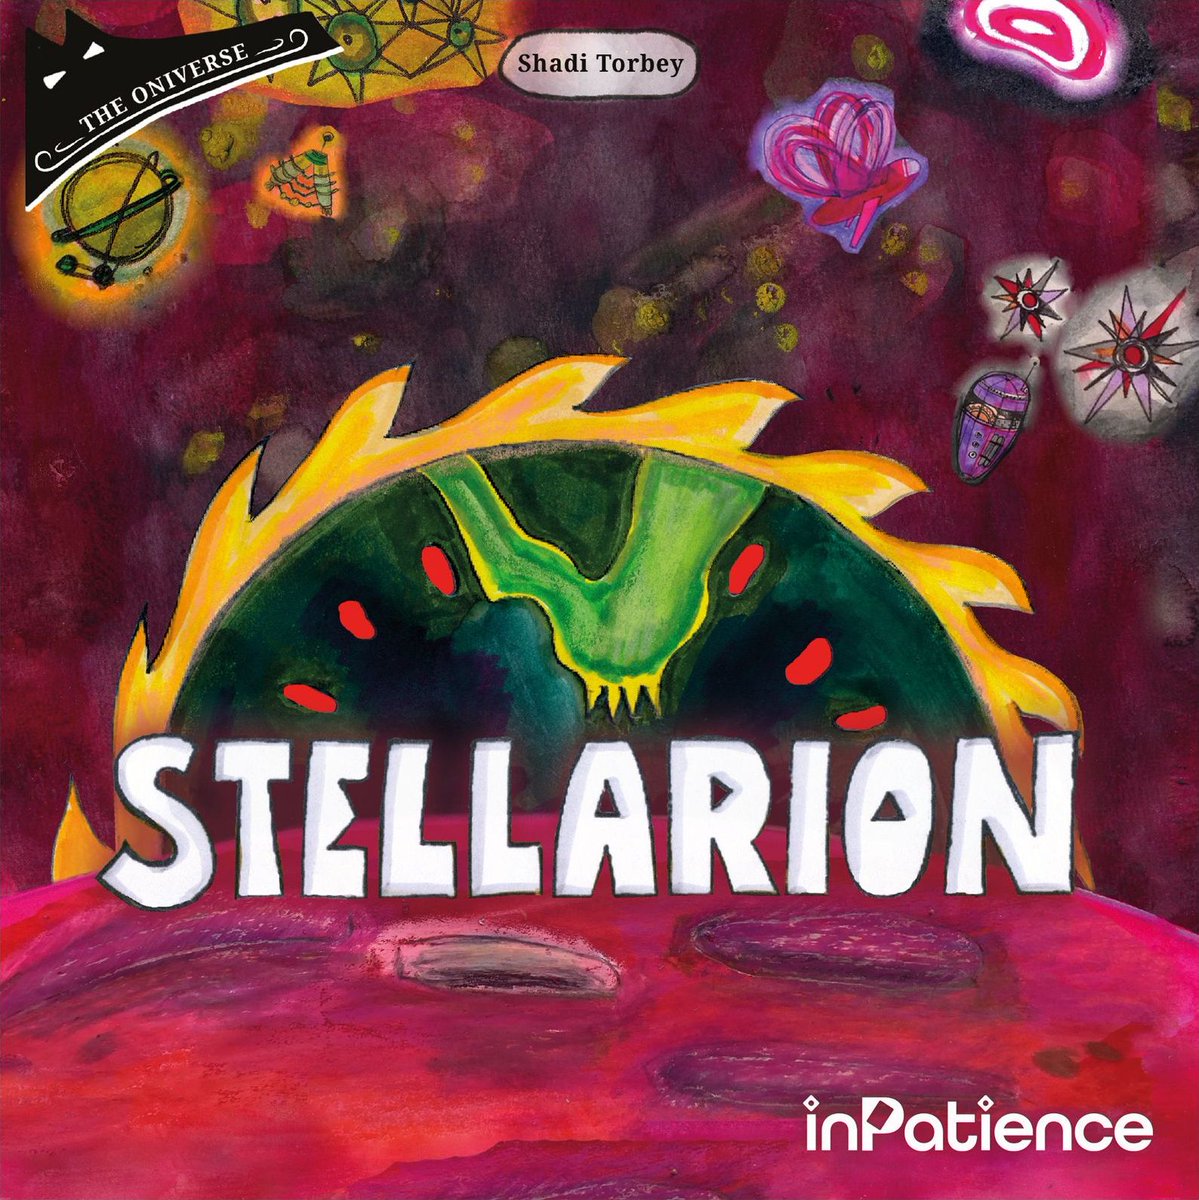 test Twitter Media - Today on BGG News, designer Shadi Torbey of @inPatience1 presents an overview of Stellarion, the latest solitaire game in the Oniverse line, which will debut at SPIEL '22.

Learn how to reach the stars: https://t.co/L04HLfAHiK —WEM https://t.co/crJDxun6oL